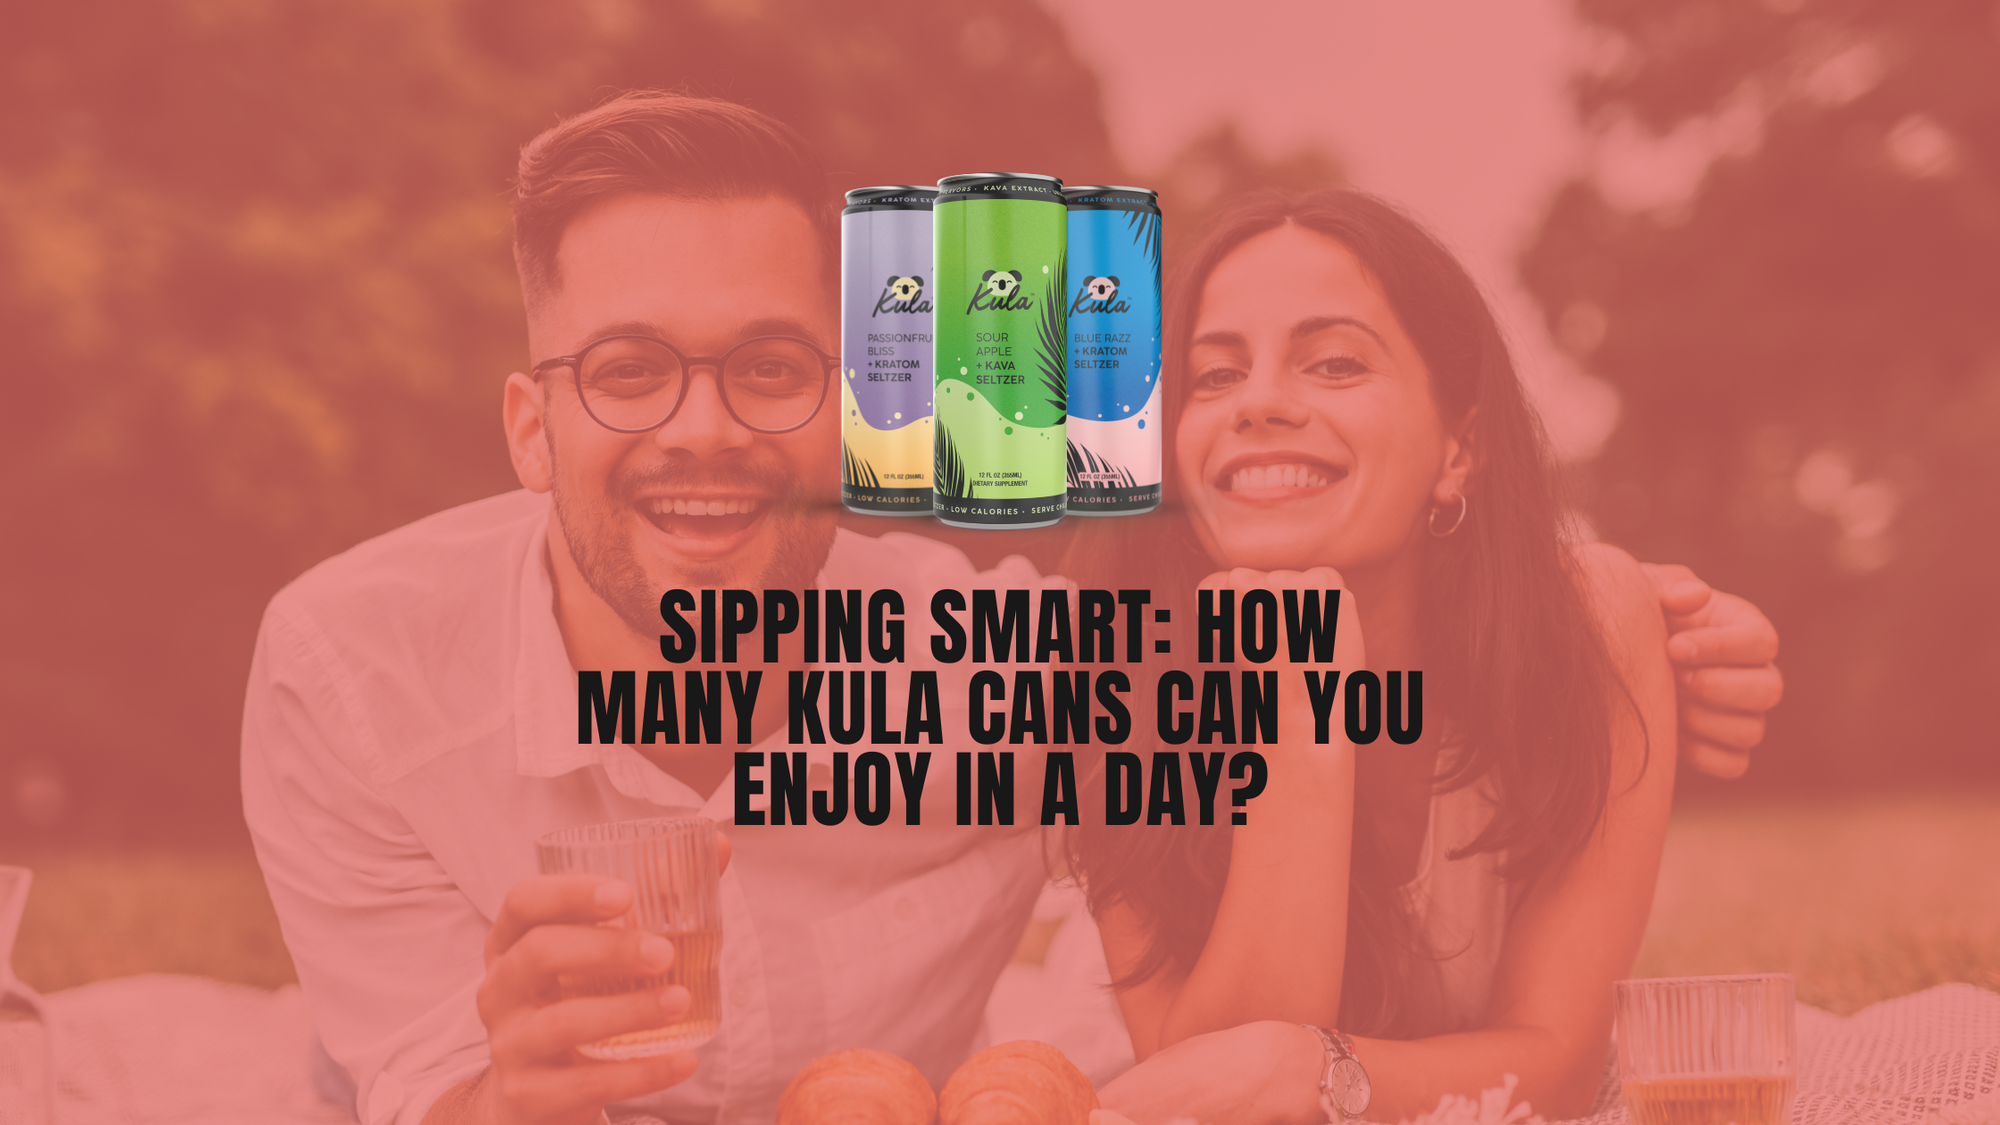 Sipping Smart: How Many Kula Cans Can You Enjoy in a Day?